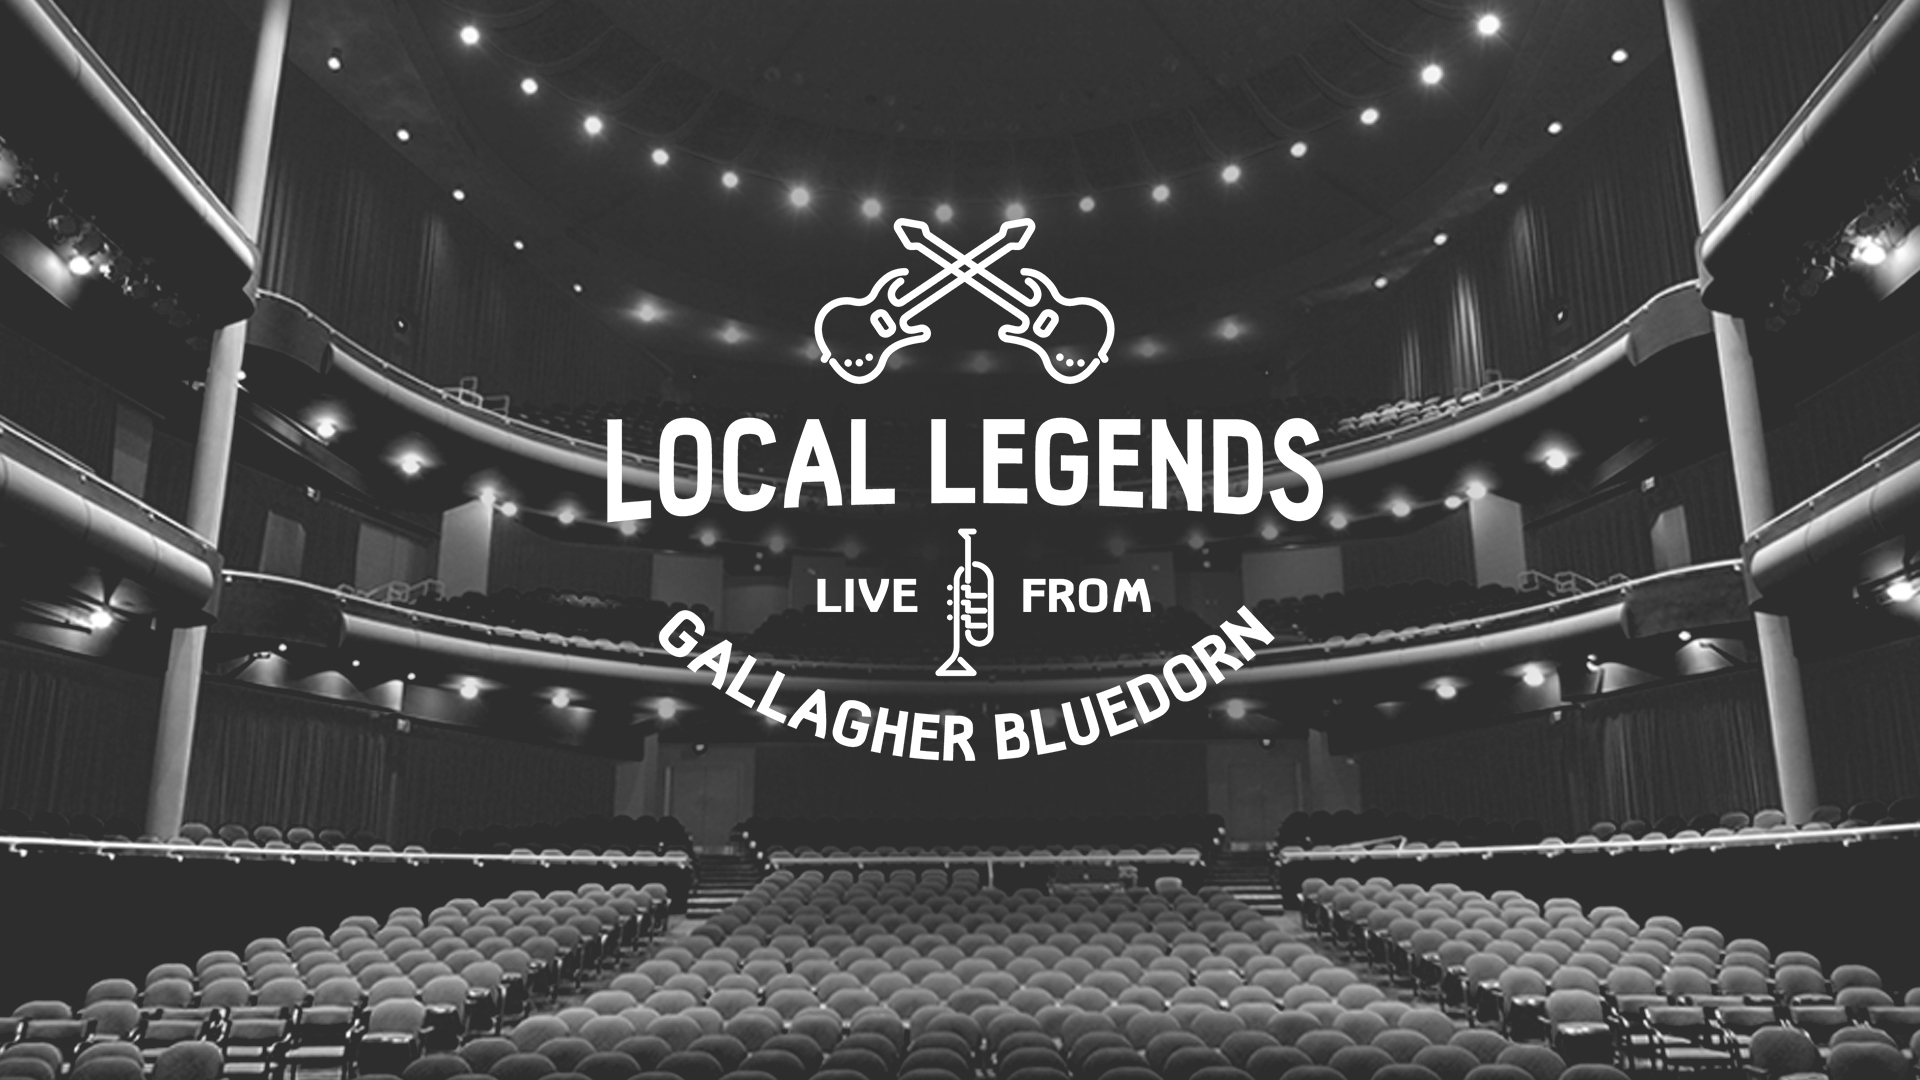 Black and white image of the open hall with white text that reads Local Legends Live from Gallagher Bluedorn